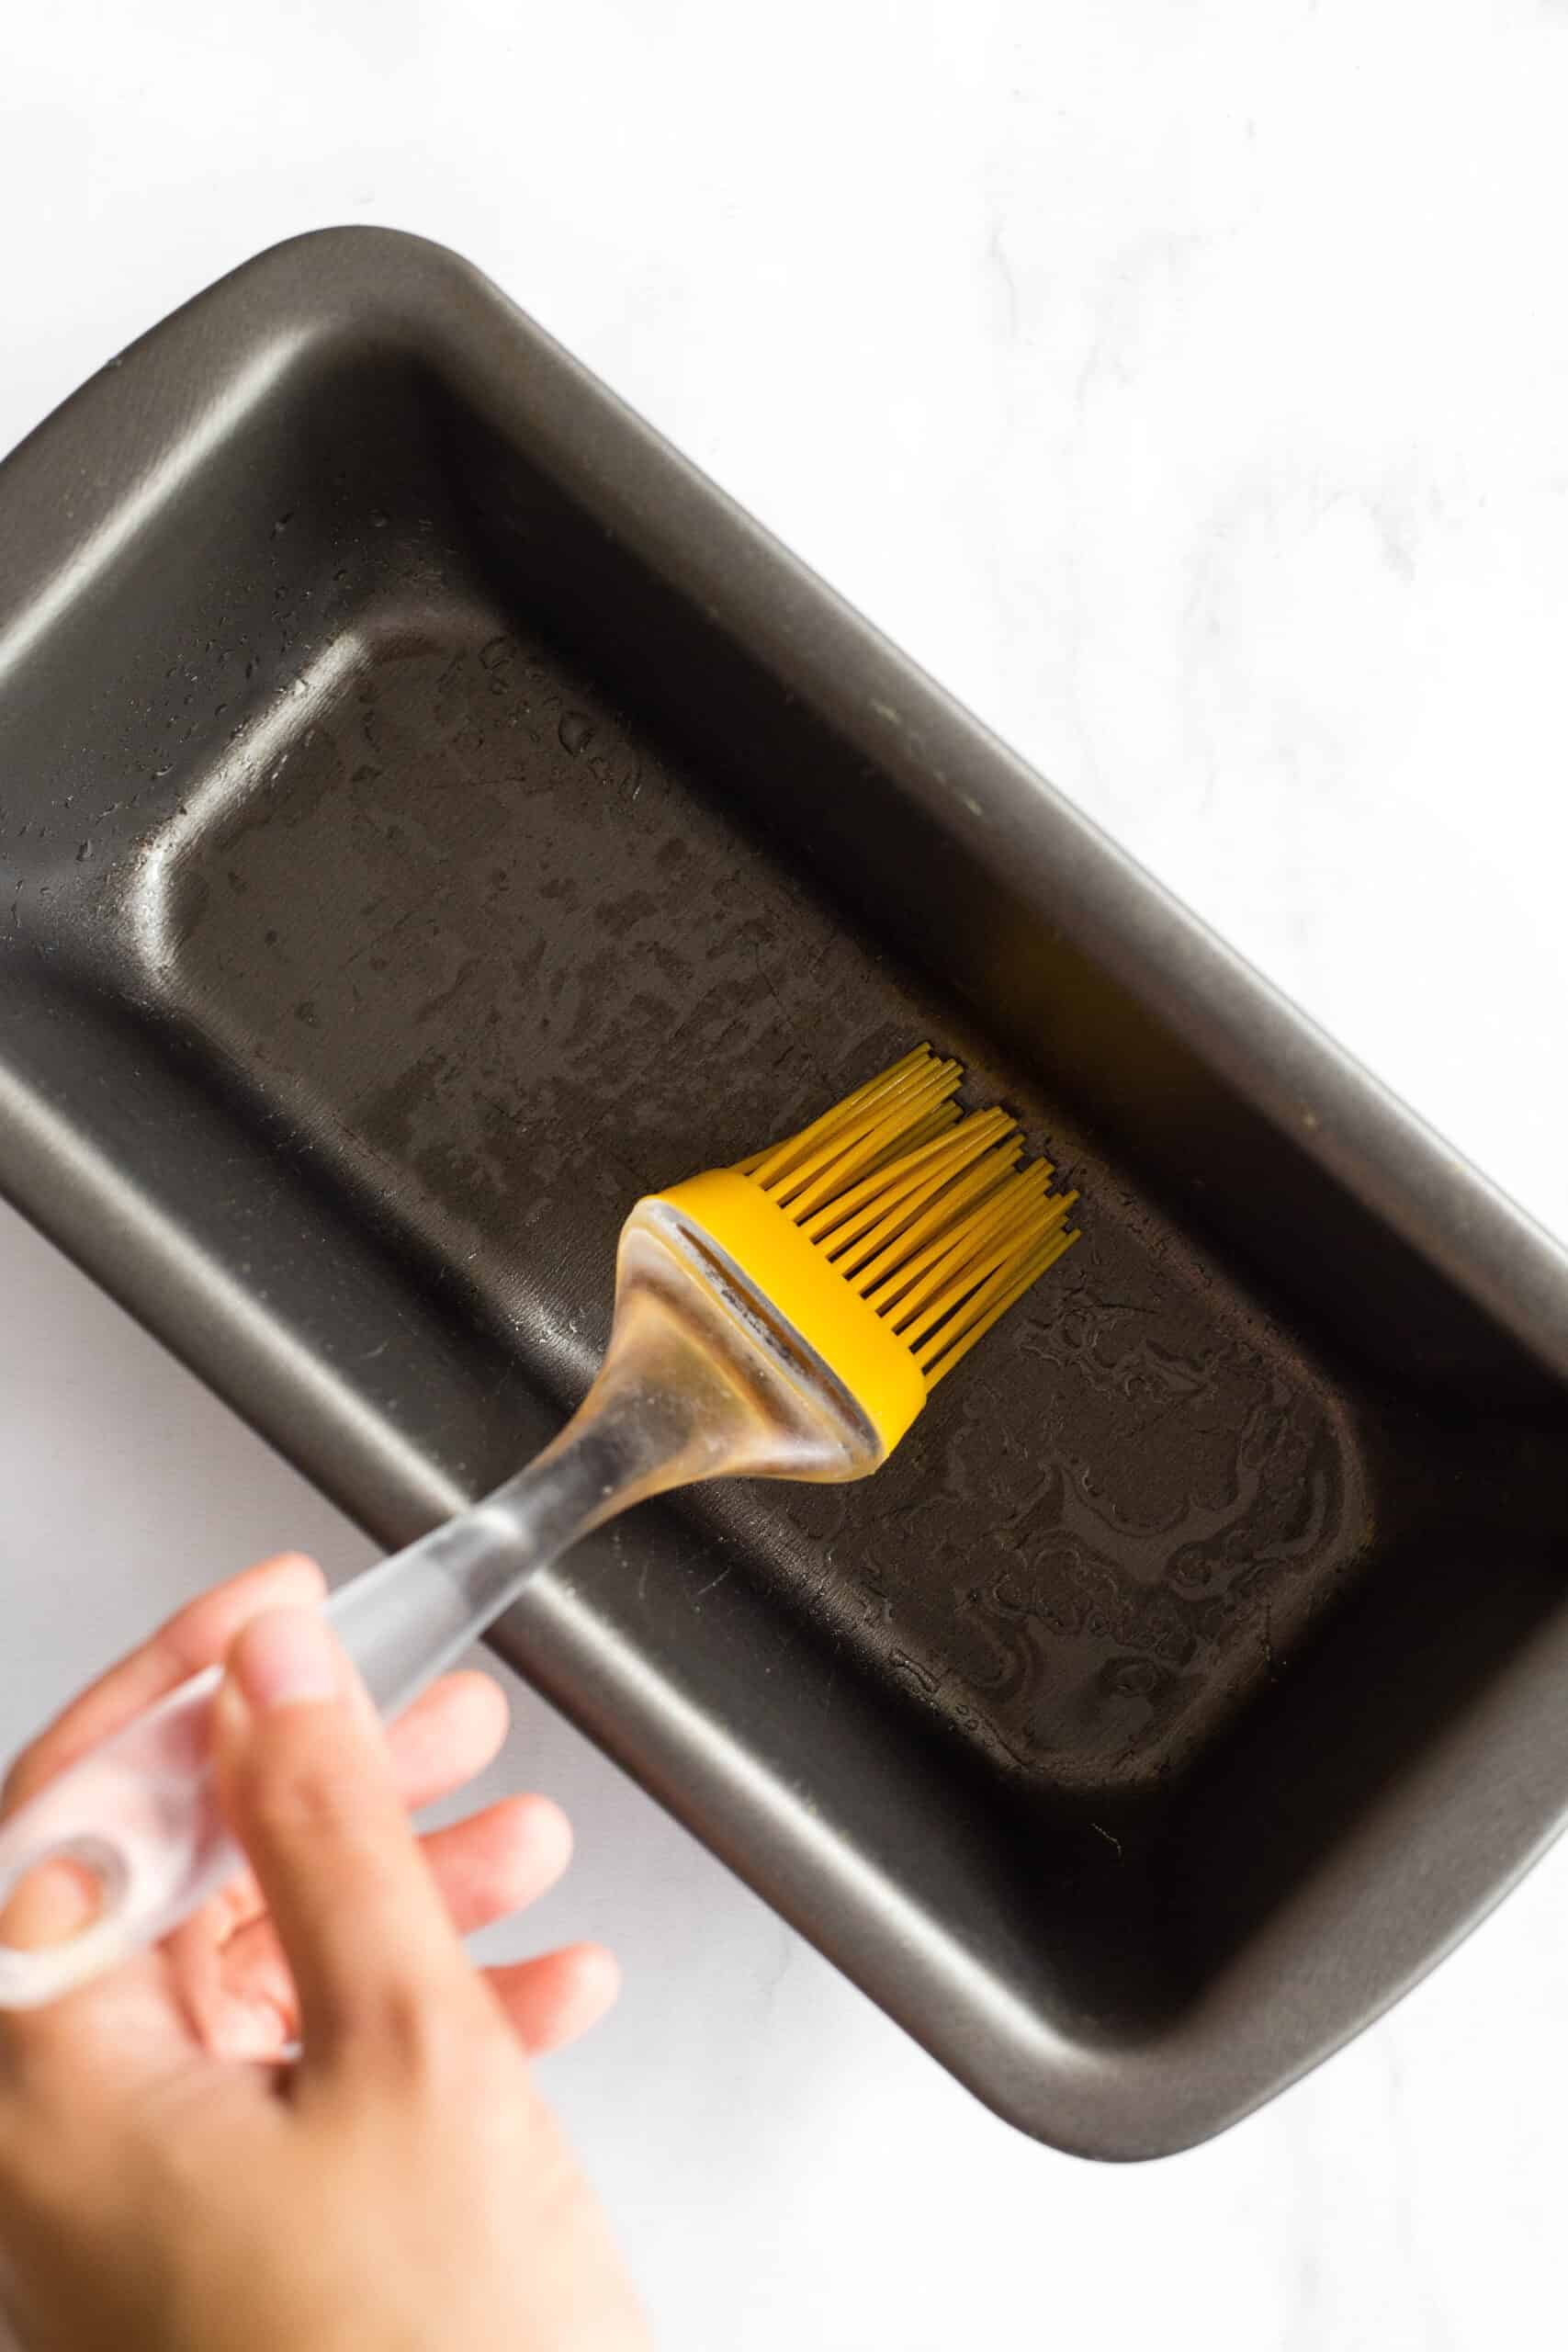 Using silicon brush to grease metal loaf pan.